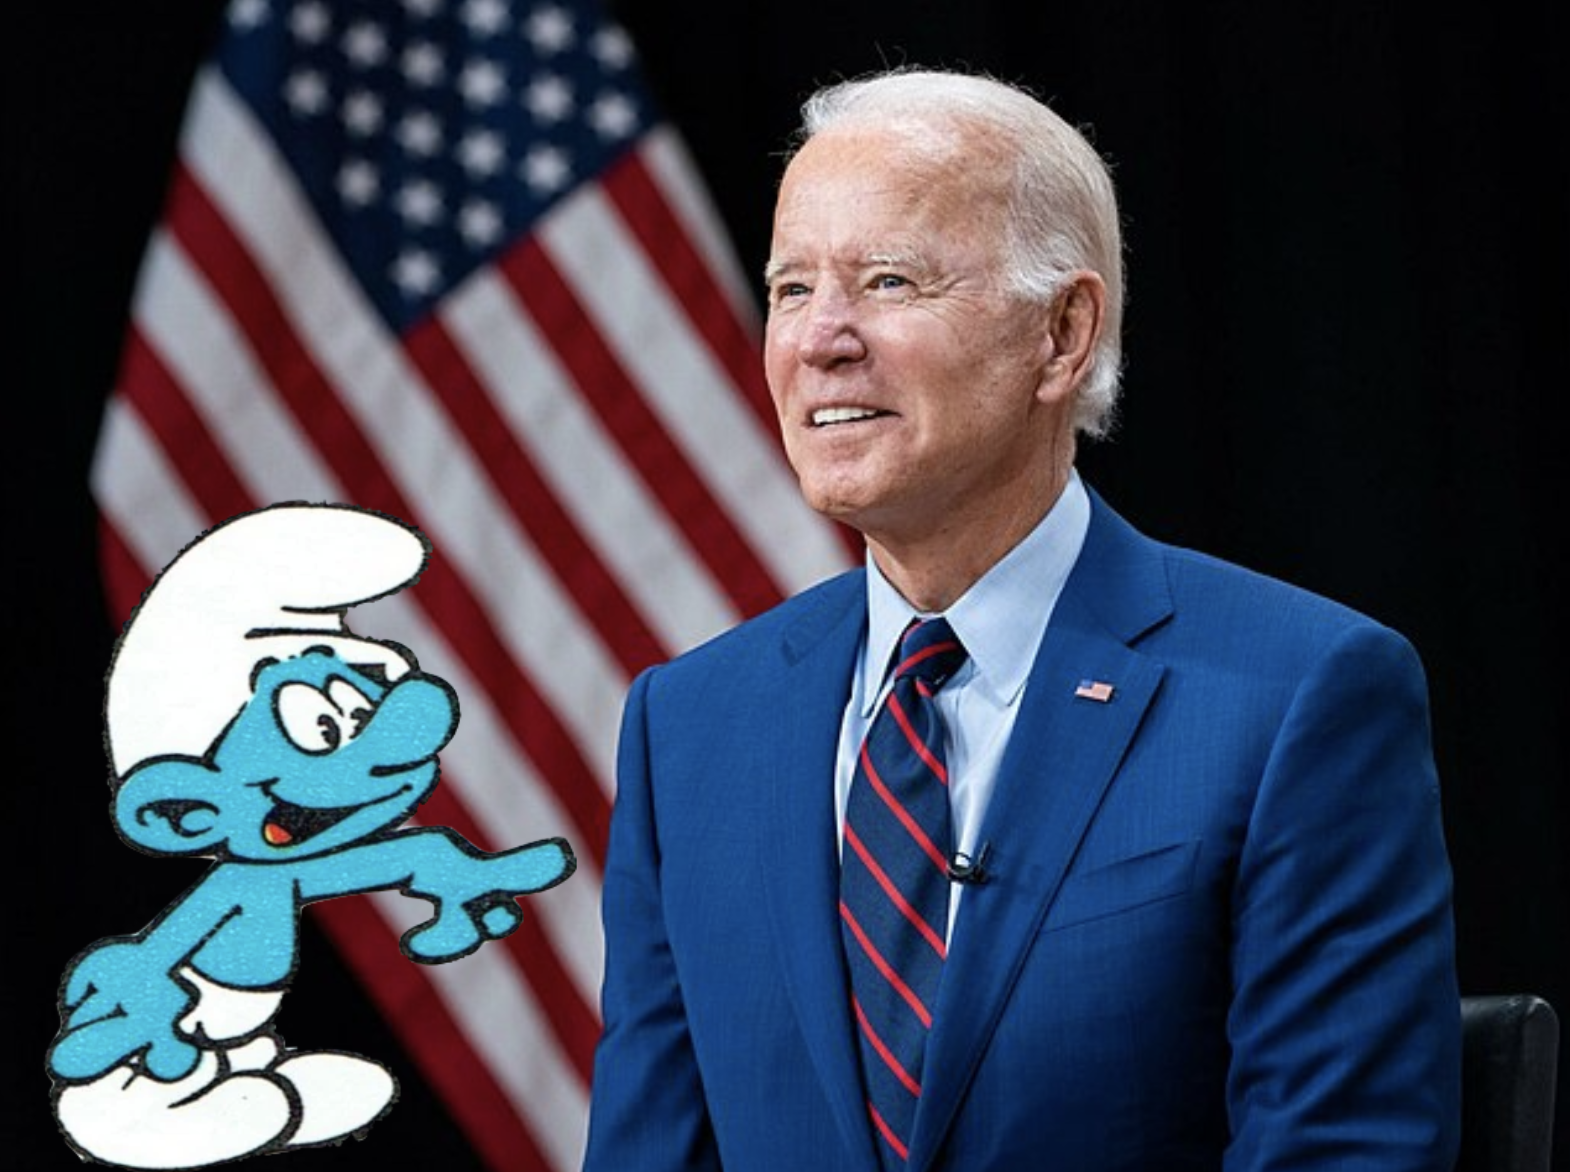 Bernegger Accuses Biden Of Criminally Laundering Money Into His Own Campaign By "Smurfing"